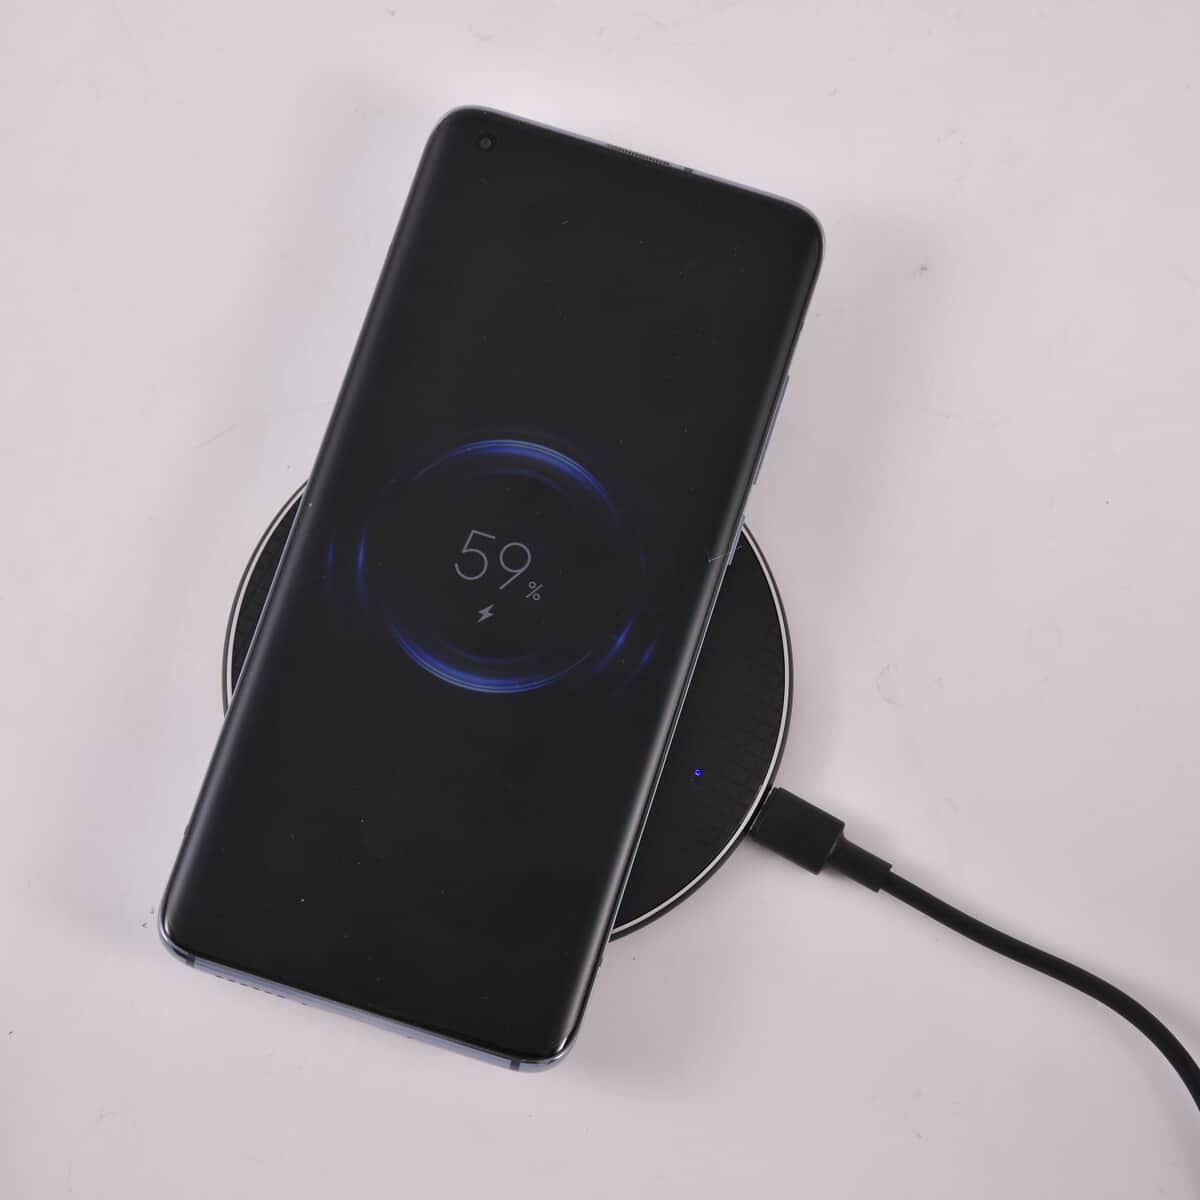 Homesmart 15W Wireless Fast Charger with 3.28 Feet USB Cable - Black, Portable Ultra Thin Fast Charging Pad With Indicator Lights image number 9